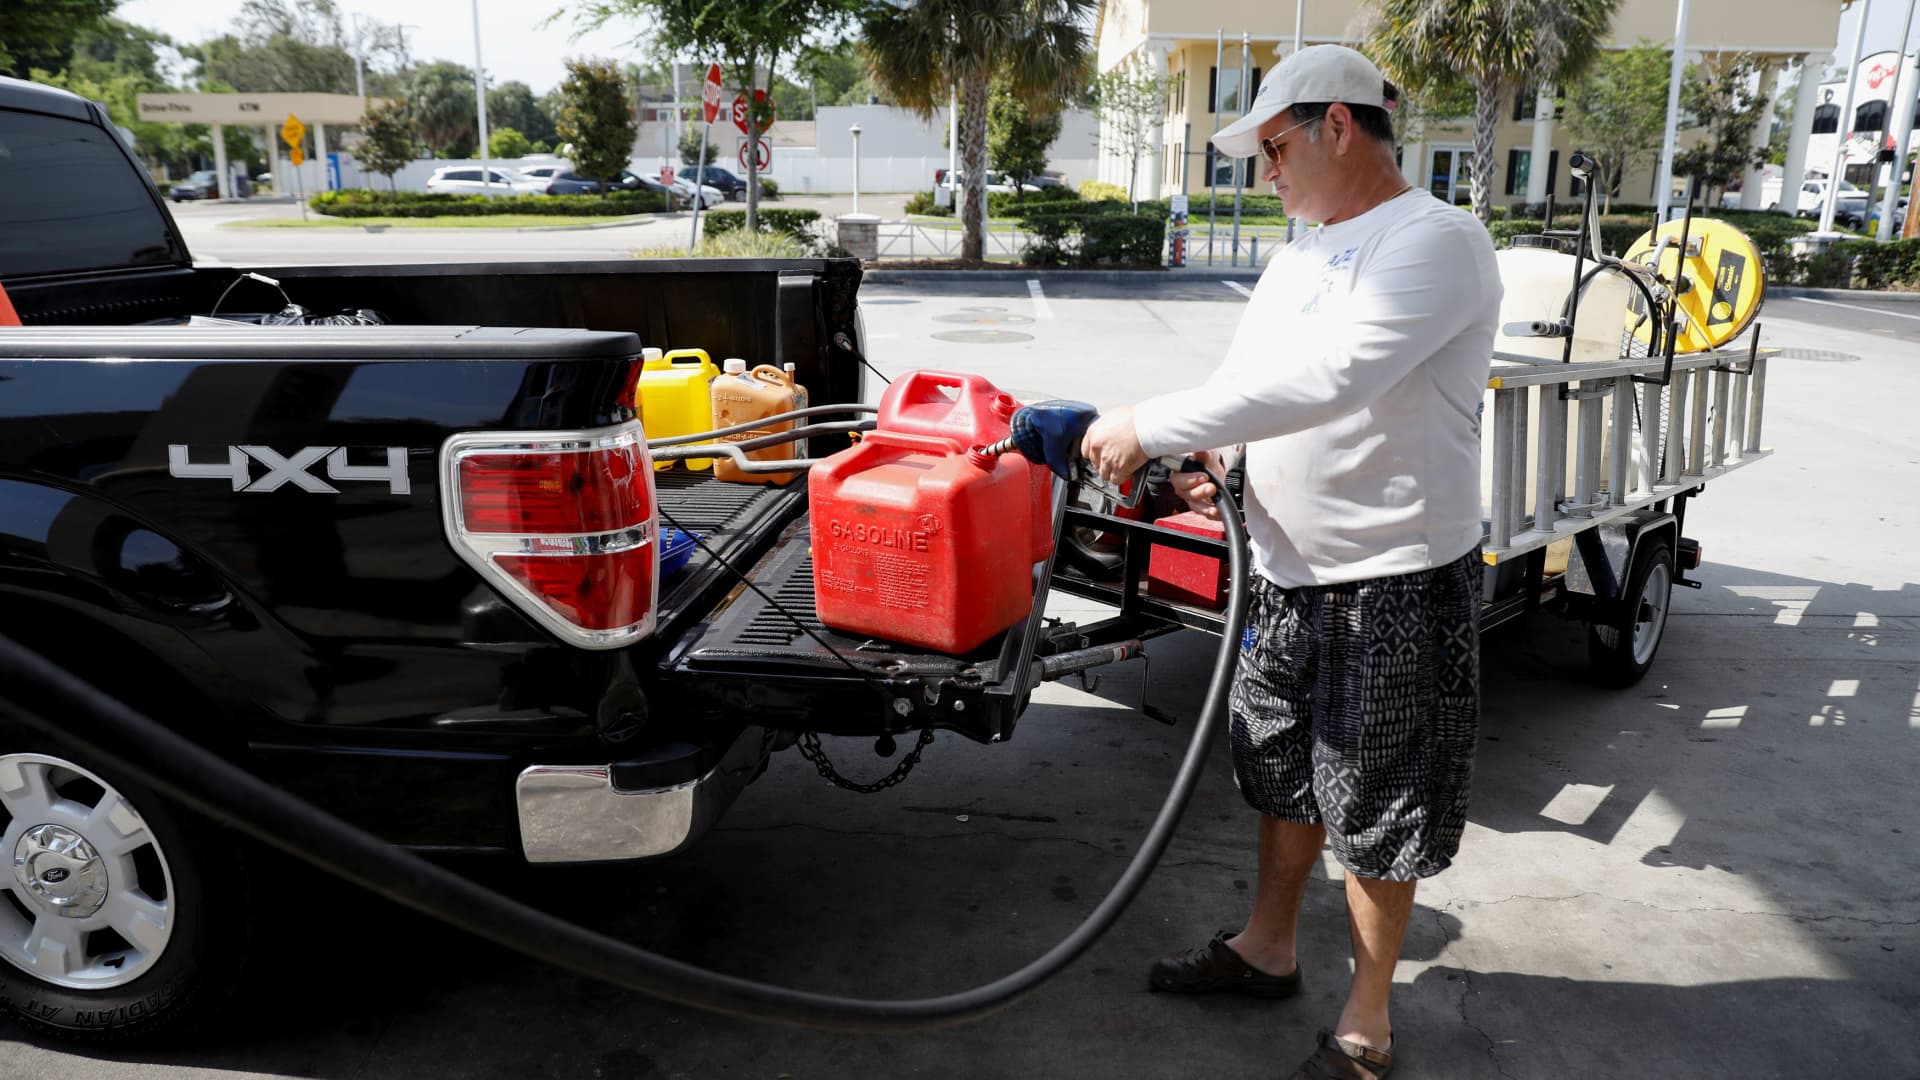 Dax Valenti fills up gas tanks at a gas station after a cyberattack crippled the biggest fuel pipeline in the country, run by Colonial Pipeline, in Tampa, Florida, May 12, 2021.